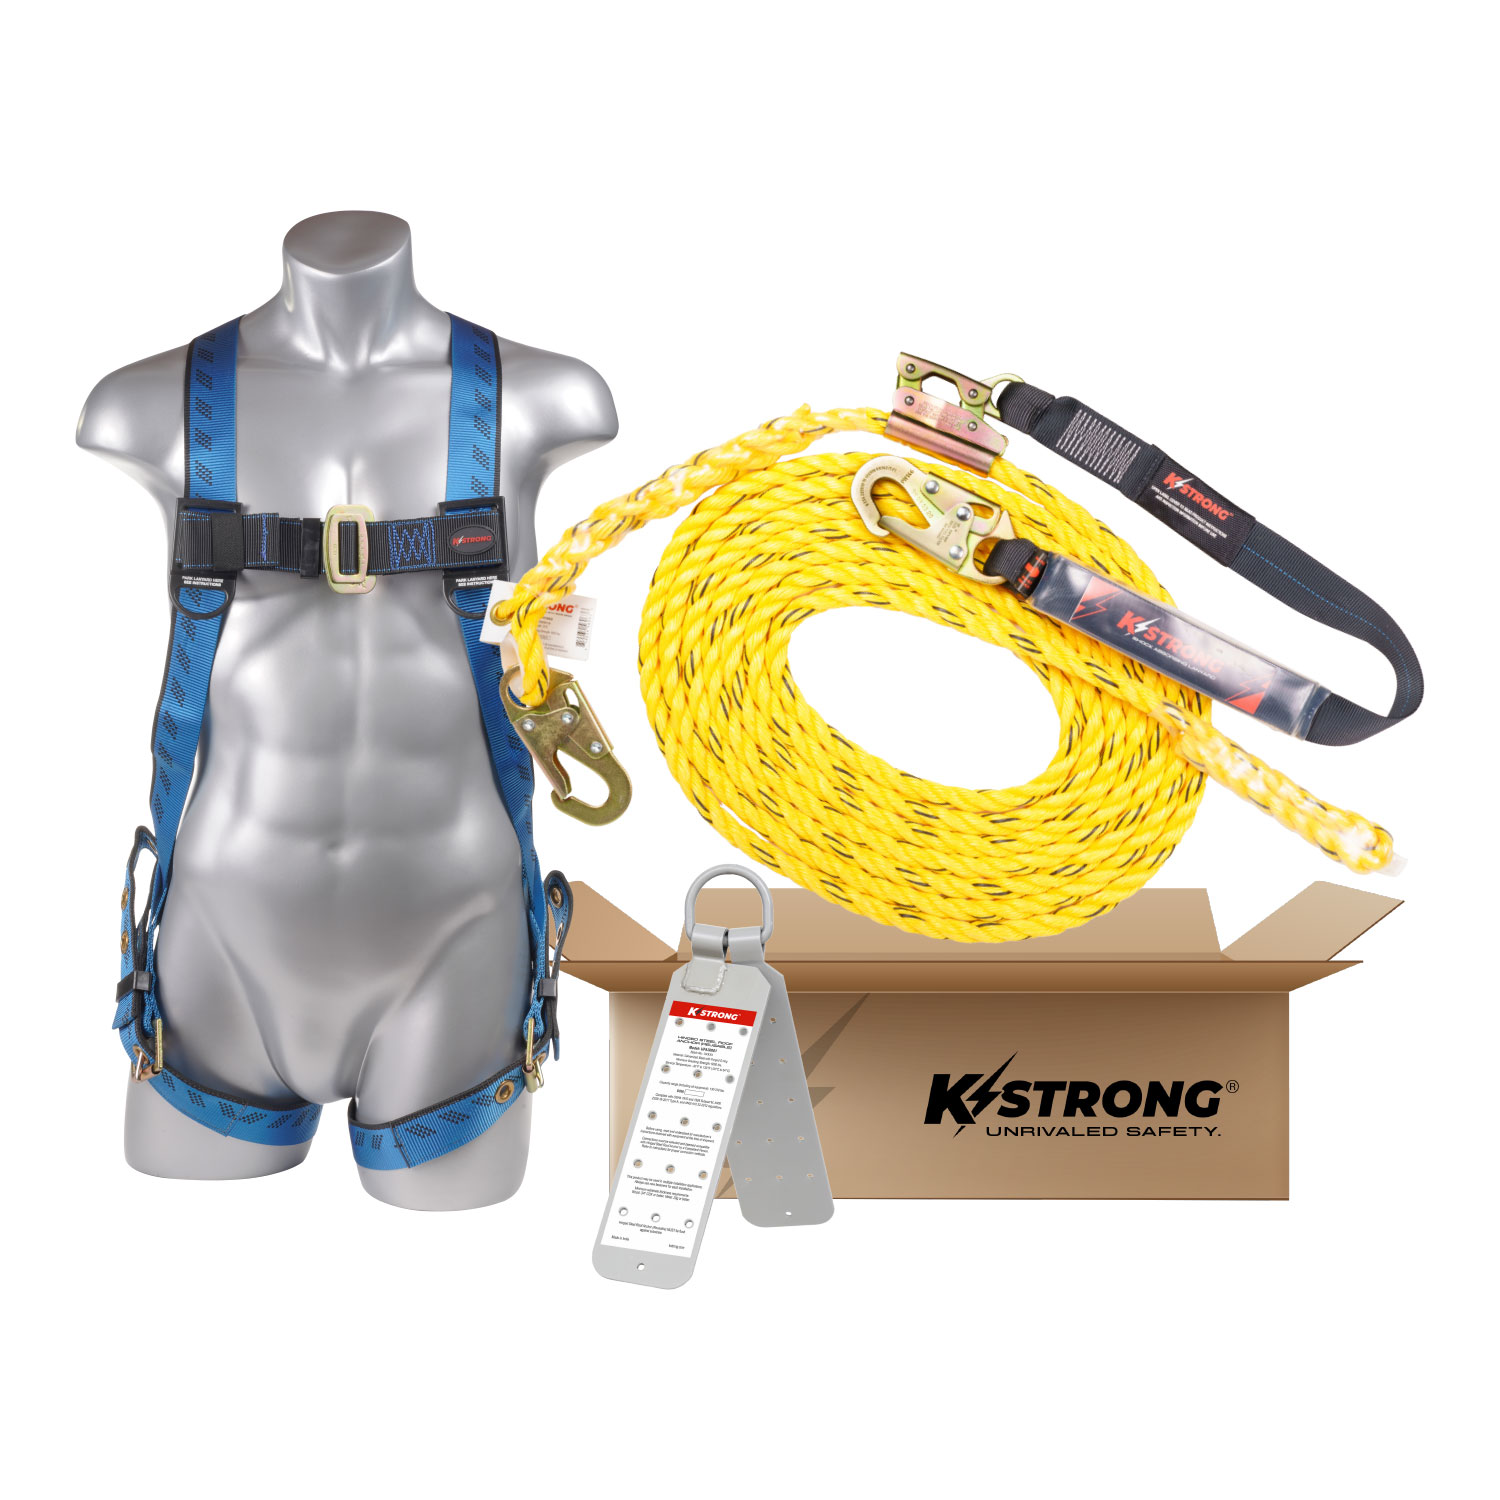 Roof Anchor Kit with Full Body Harness, Lifeline, Lanyard, Rope Grab, Roof  Anchor and Bag - UltraSafeUSA